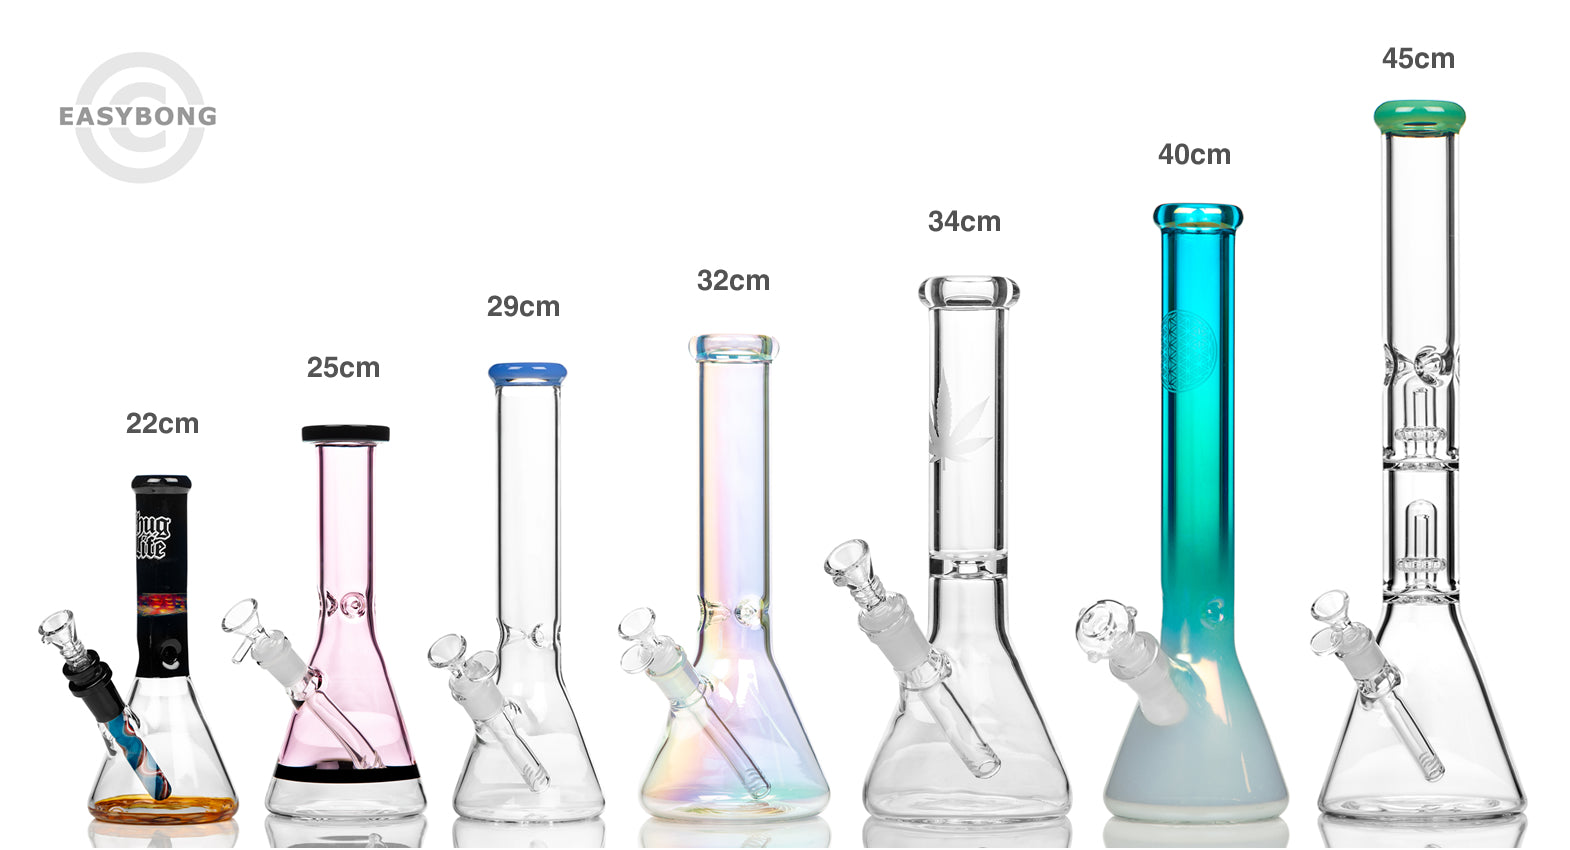 Glass beaker bong size comparison from small to large.